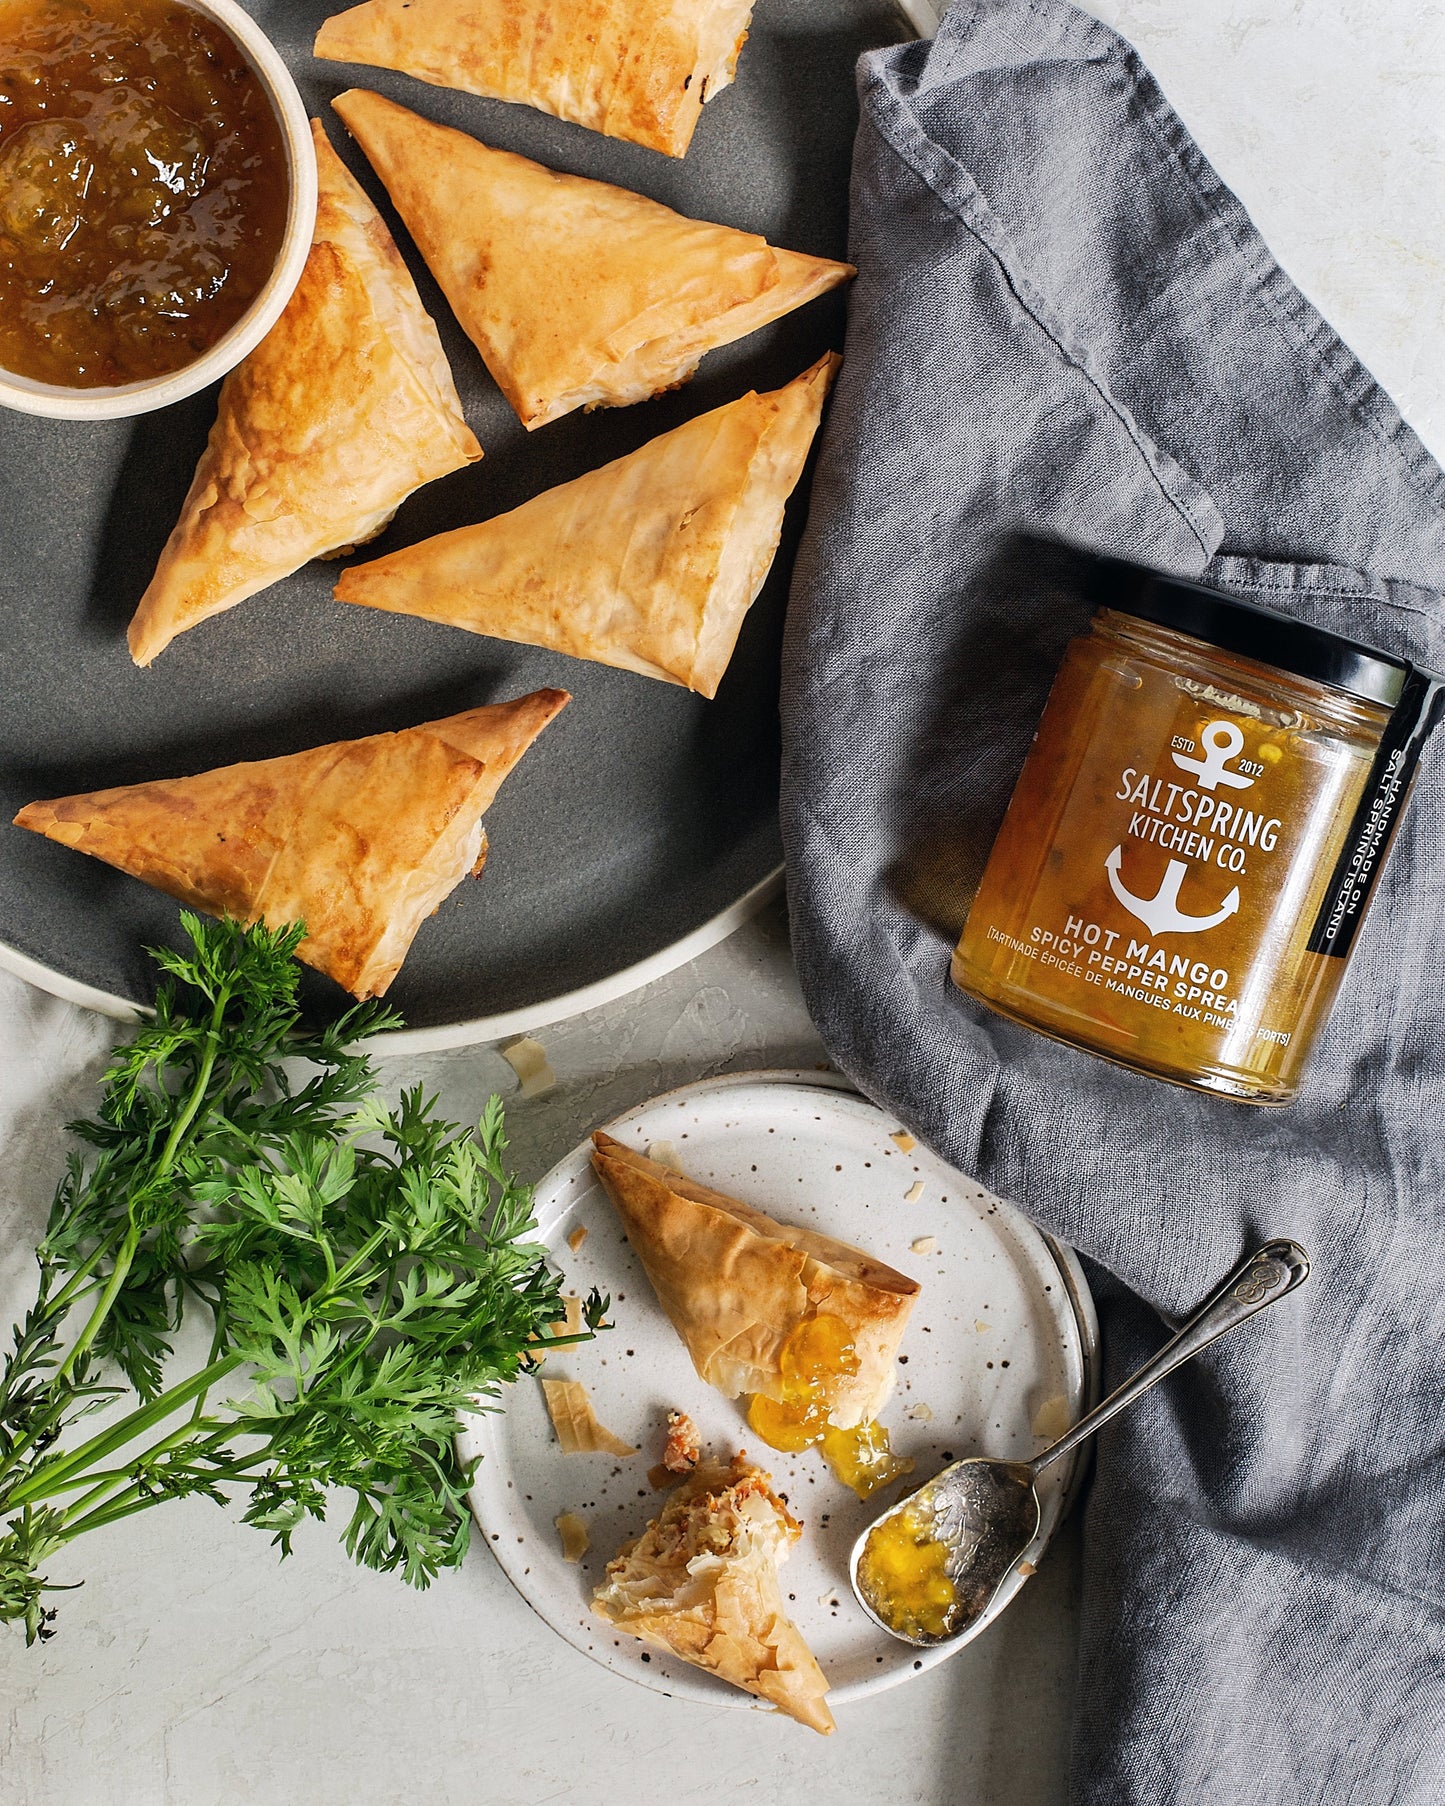 Salt Spring Kitchen Company Hot Mango Spicy Pepper Spread with Carrot Triangles